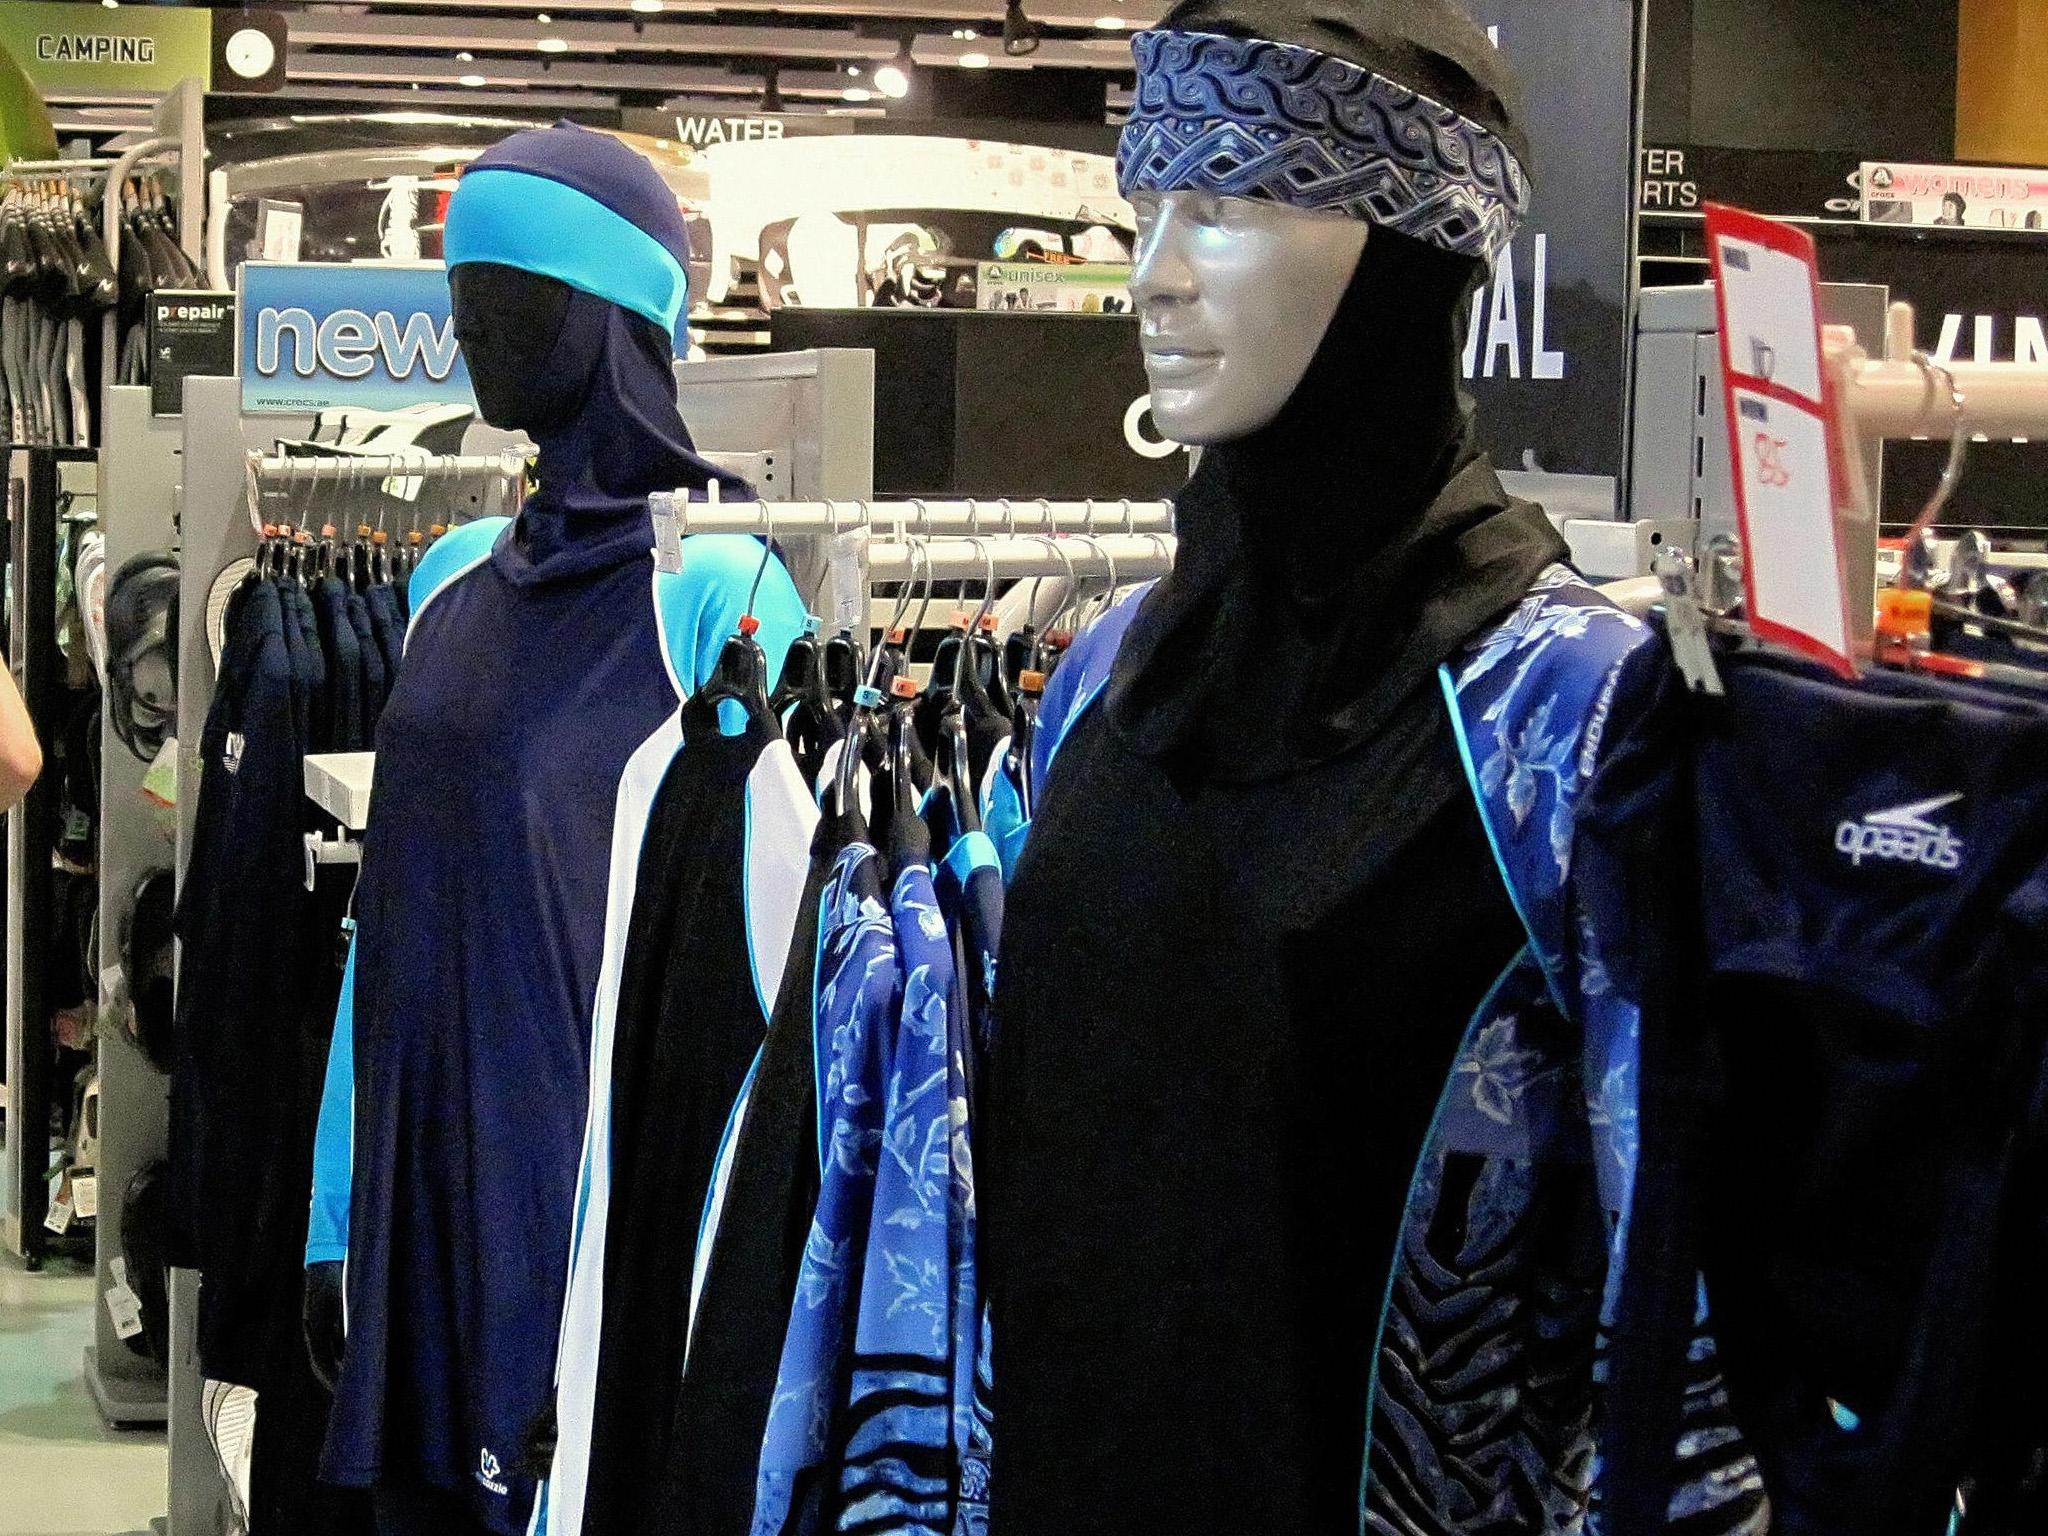 Burkinis have already sparked a heated debate about human rights in France